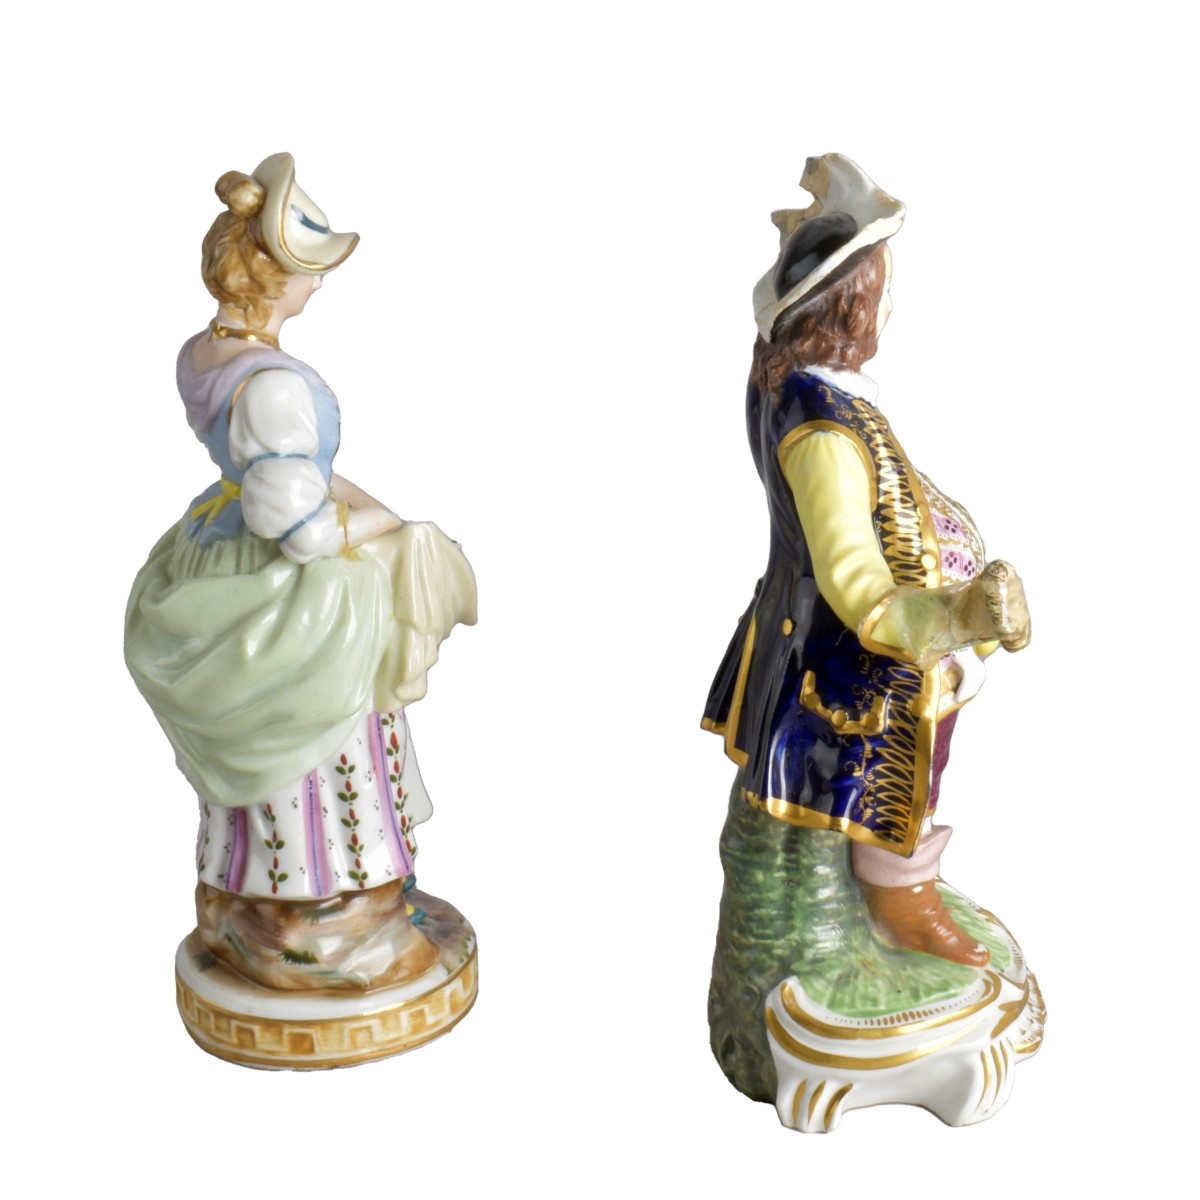 Two Porcelain Victorian Figurines